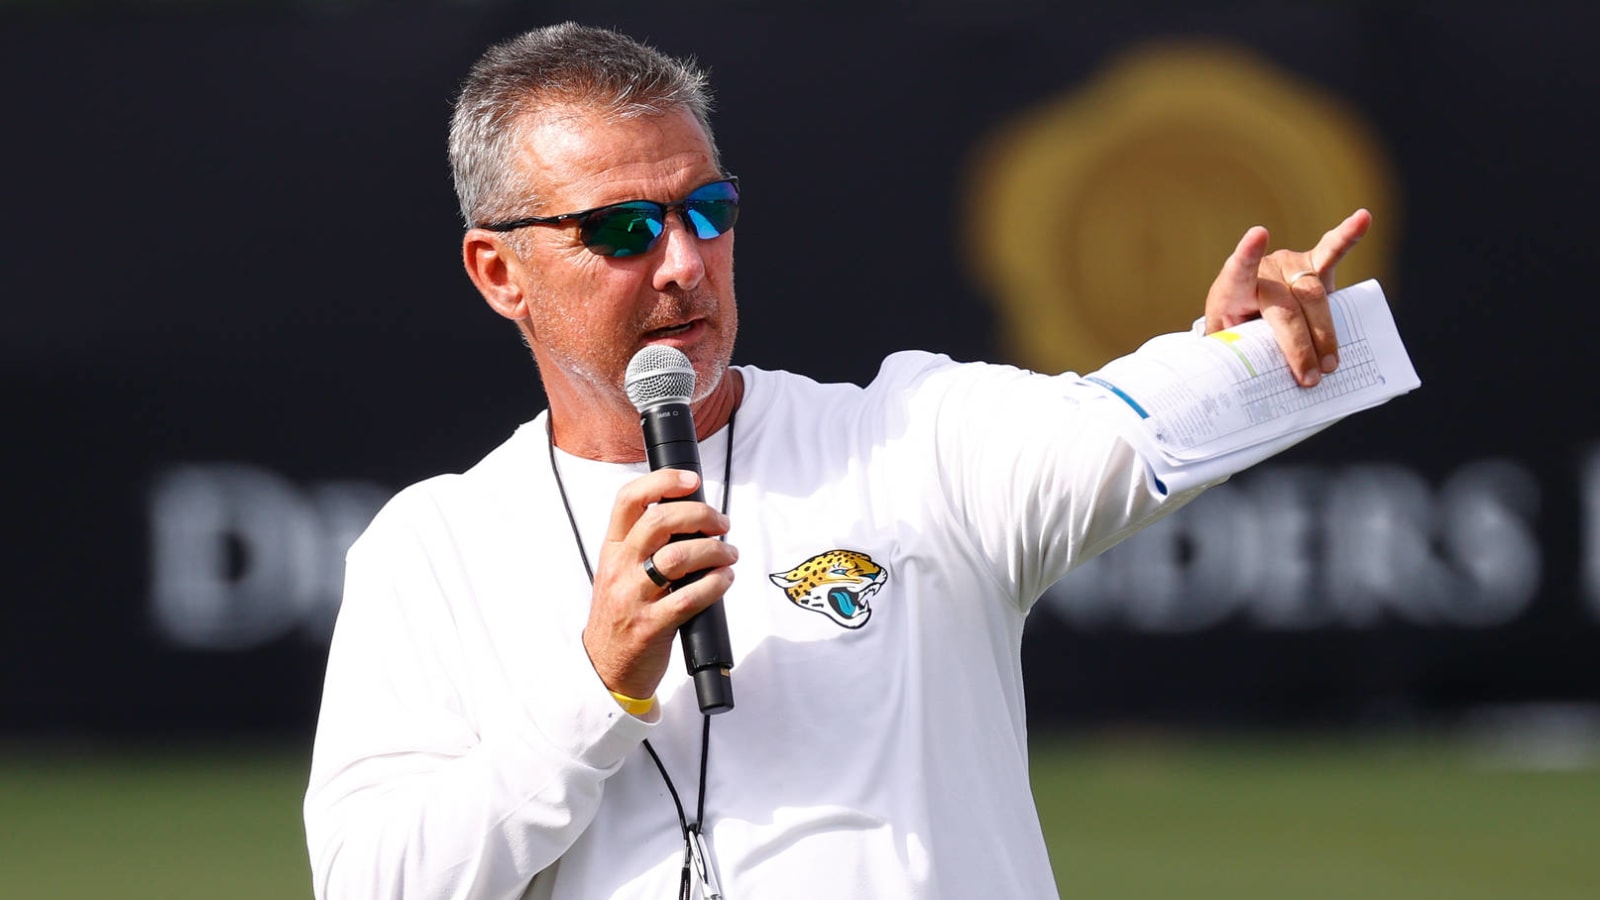 Urban Meyer: Jags will have a win-now mentality